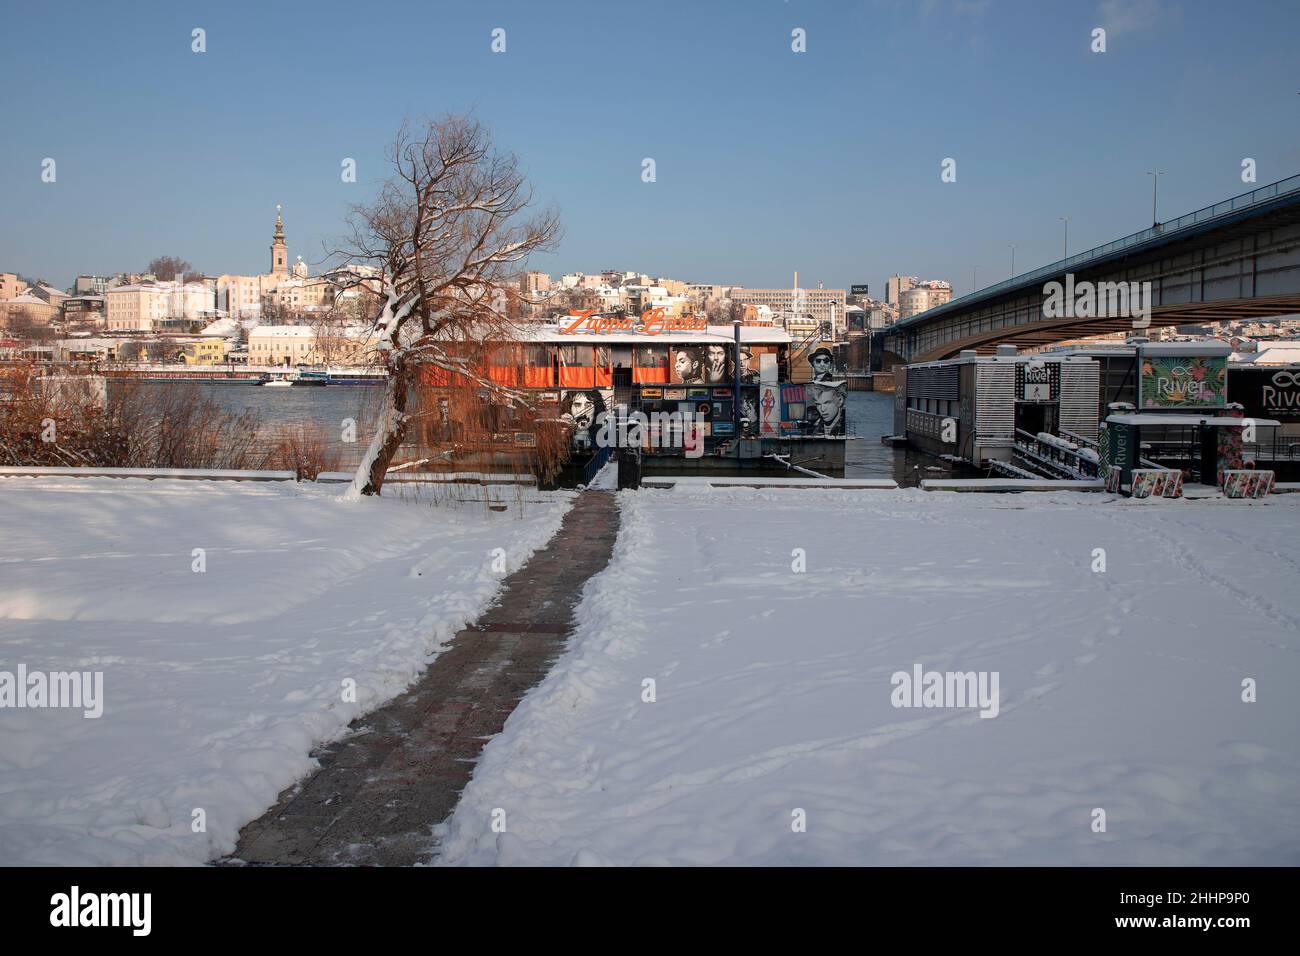 Serbia, Jan 2022: A row of raft house clubs along the Sava river in Belgrade Stock Photo